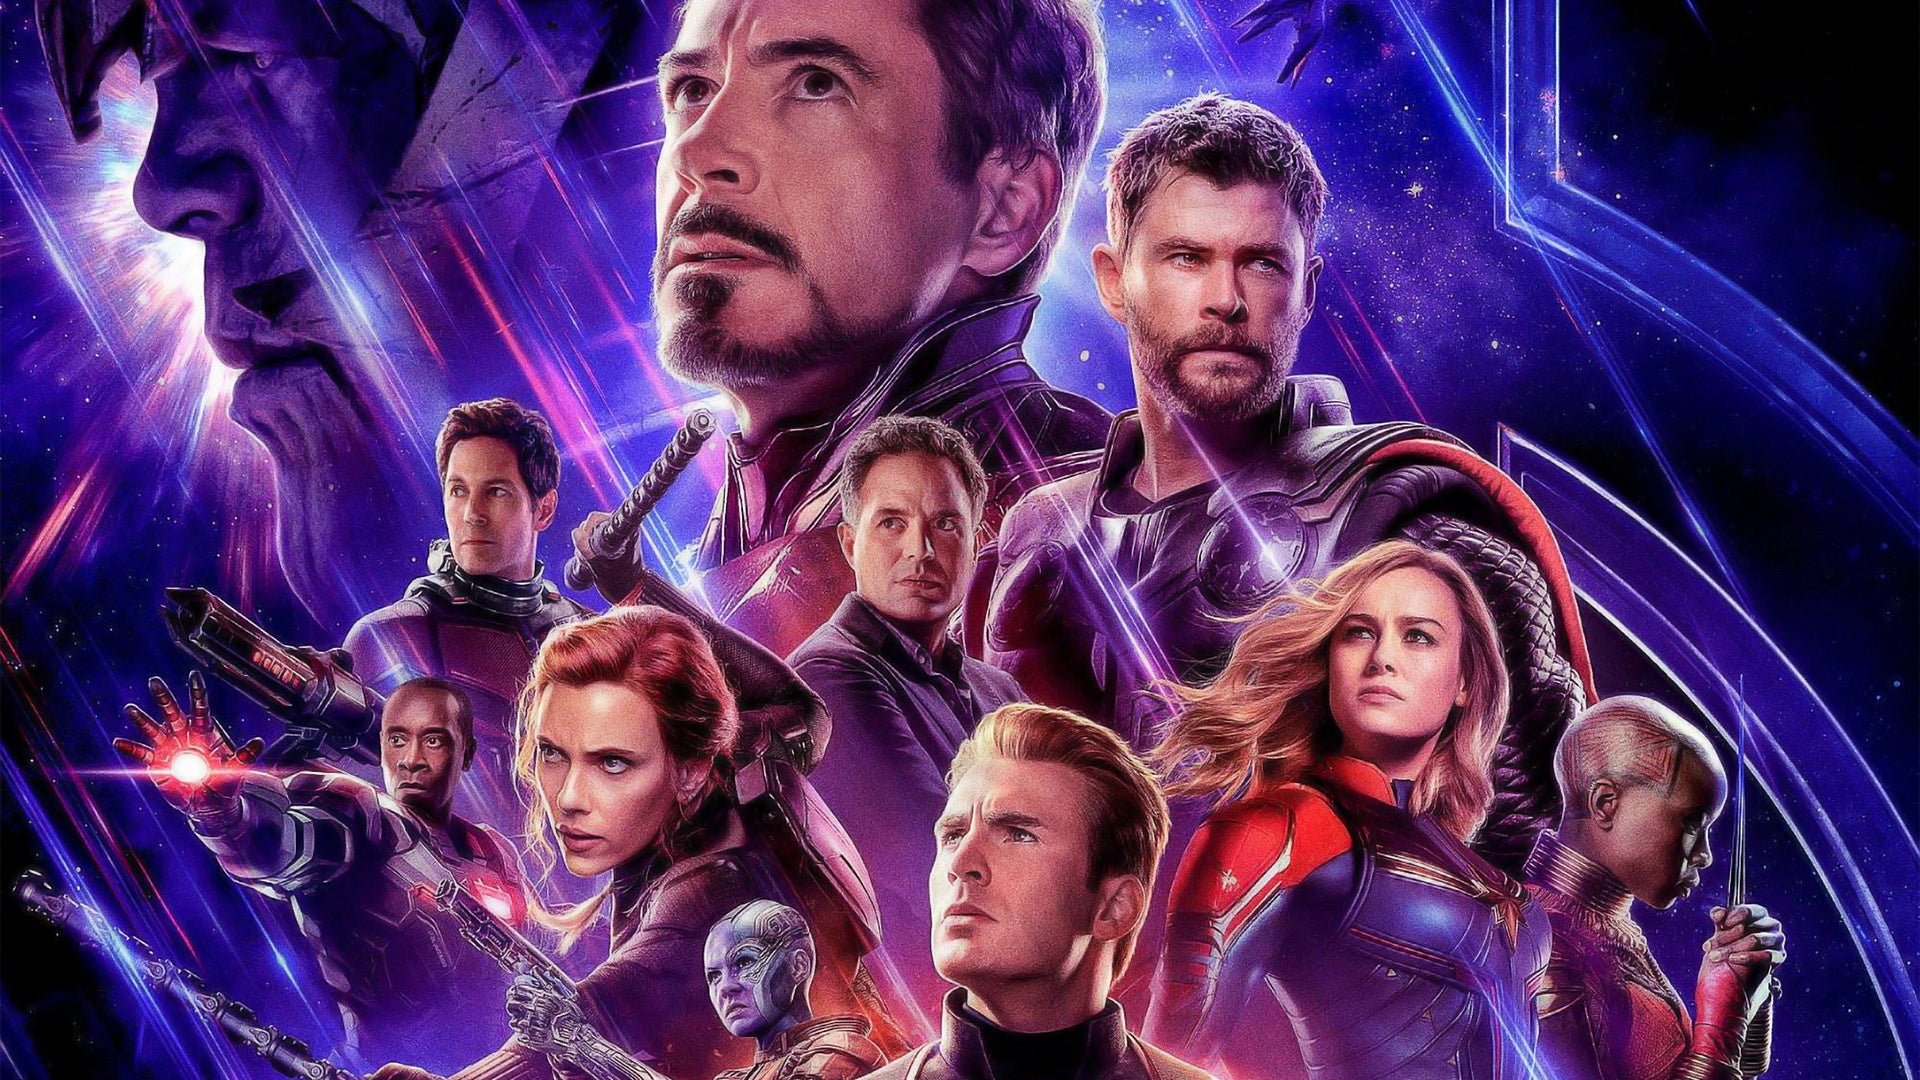 Marvel's Avengers: Endgame - Limited Edition Collectible SteelBook